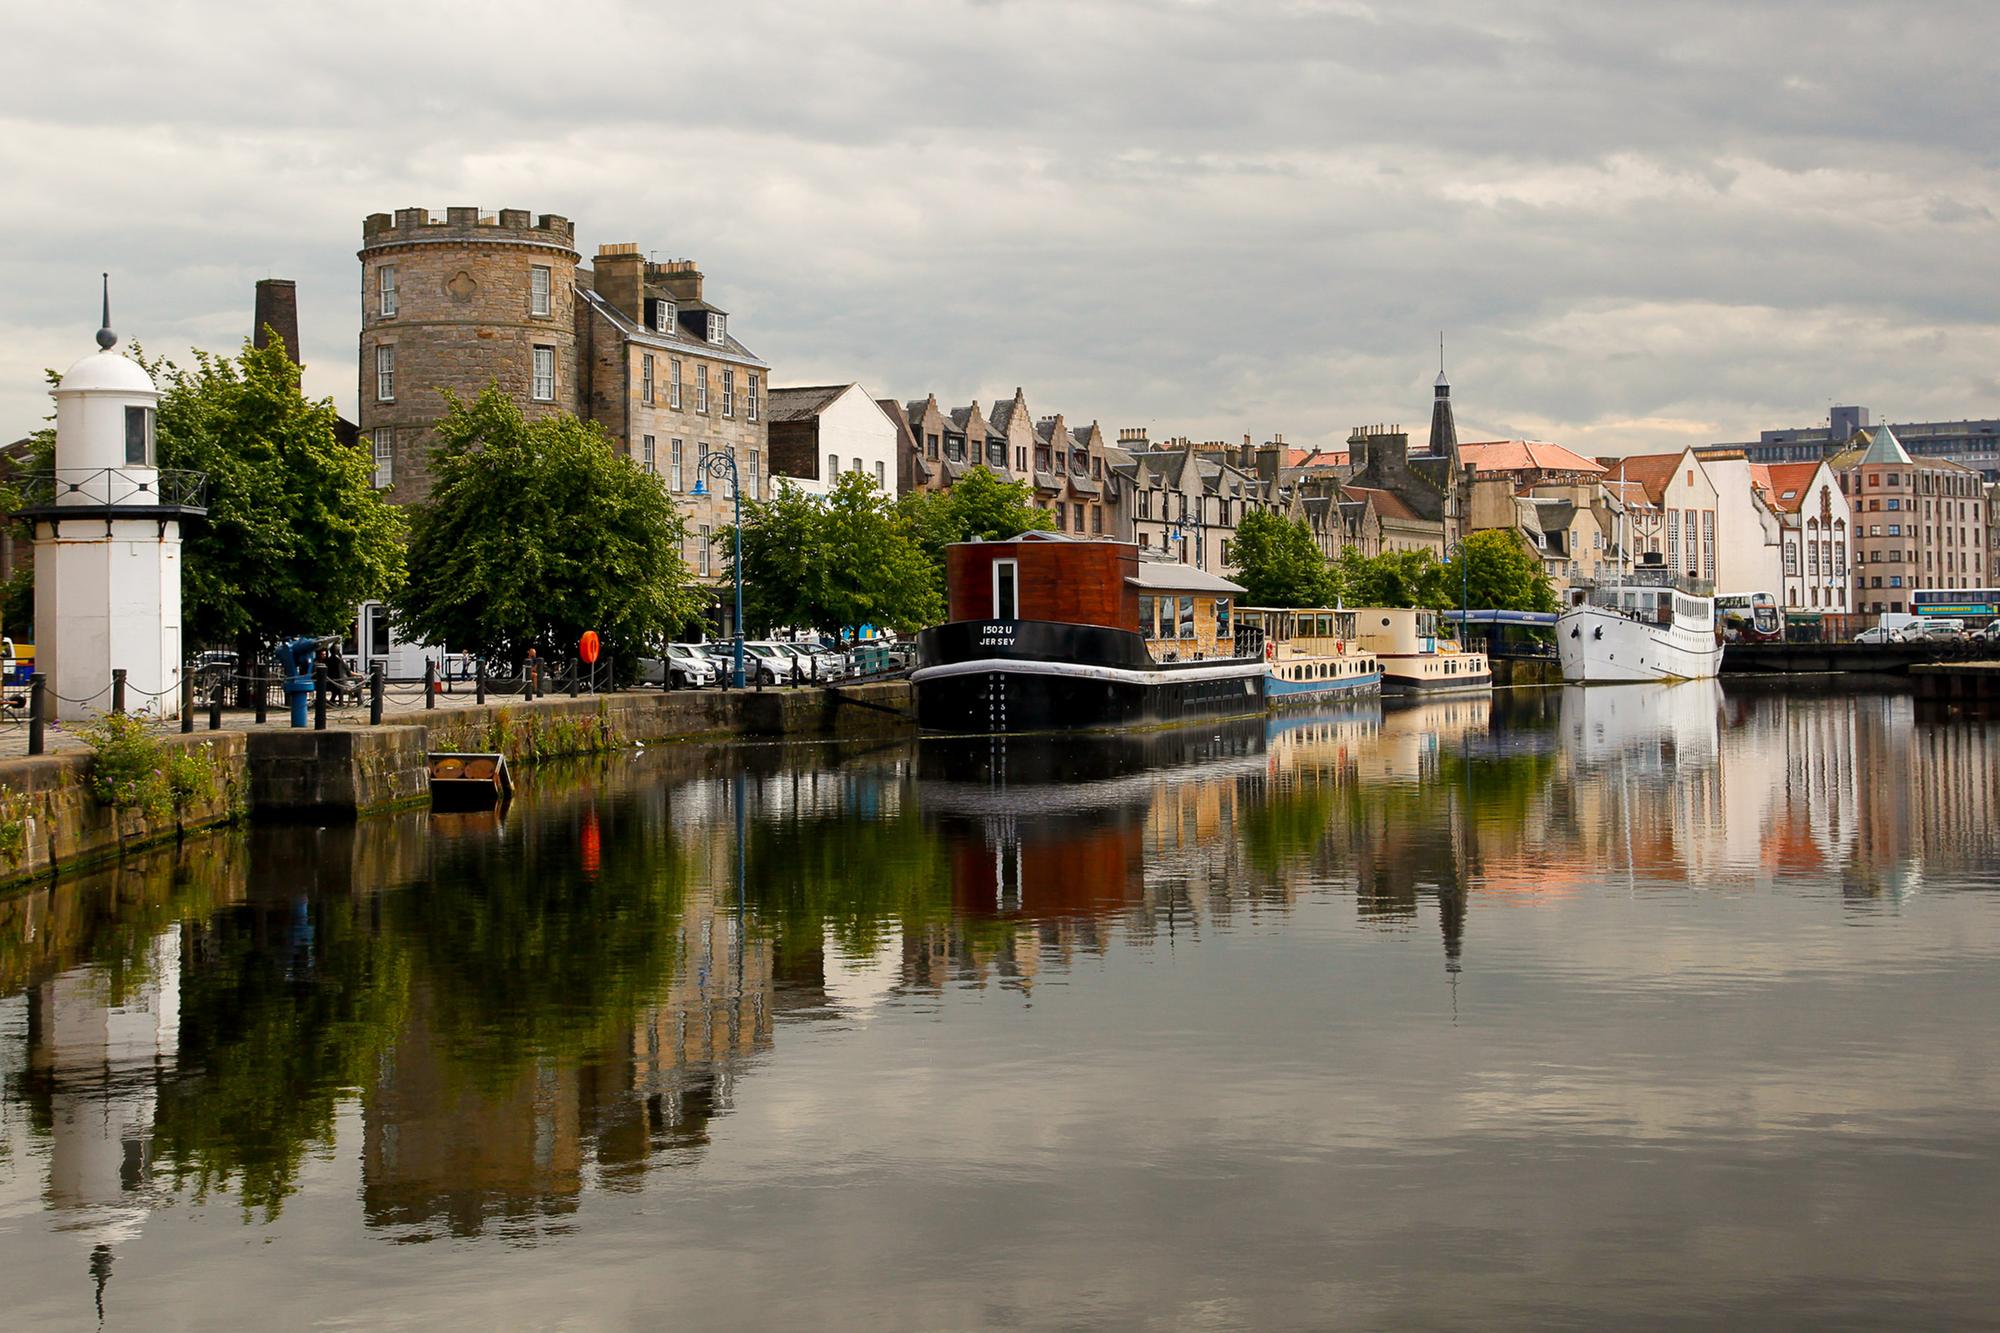 Leith named best place to live in Scotland | Edinburgh News